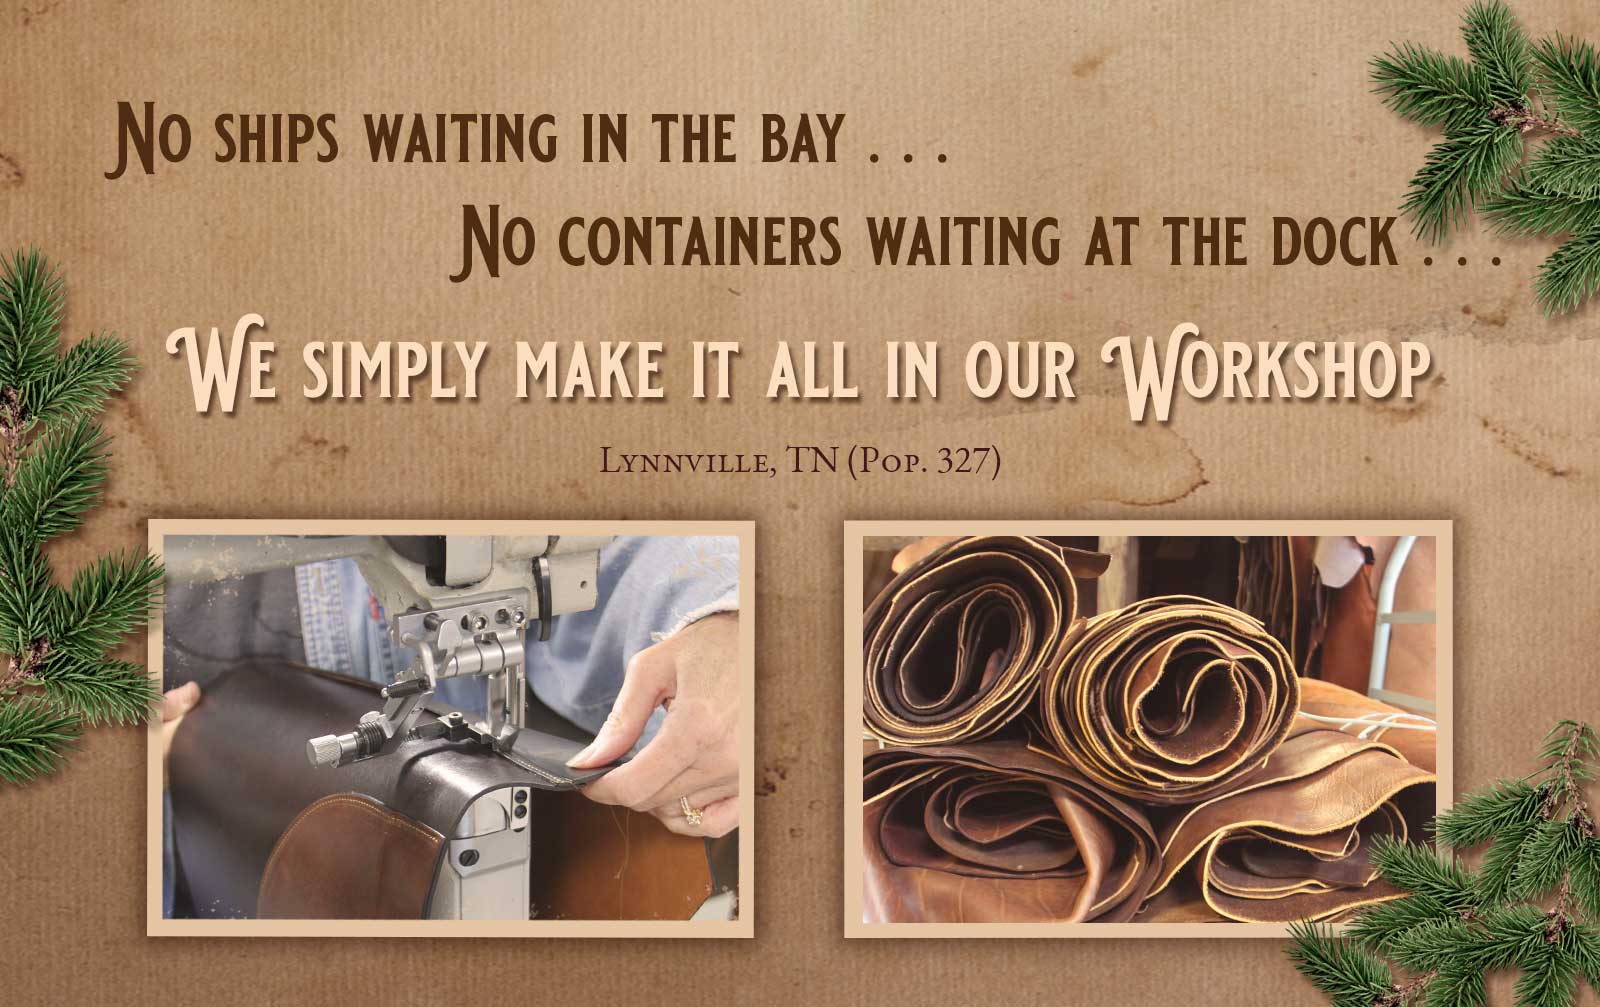 No ships waiting in thew bay . . . No containers waiting at the docks . . . We simply make it all in our workshop. Lynnville, TN Pop. 327 (Close-up photo of leather being sewn on left; close-up photo of rolled up leather hides on right)